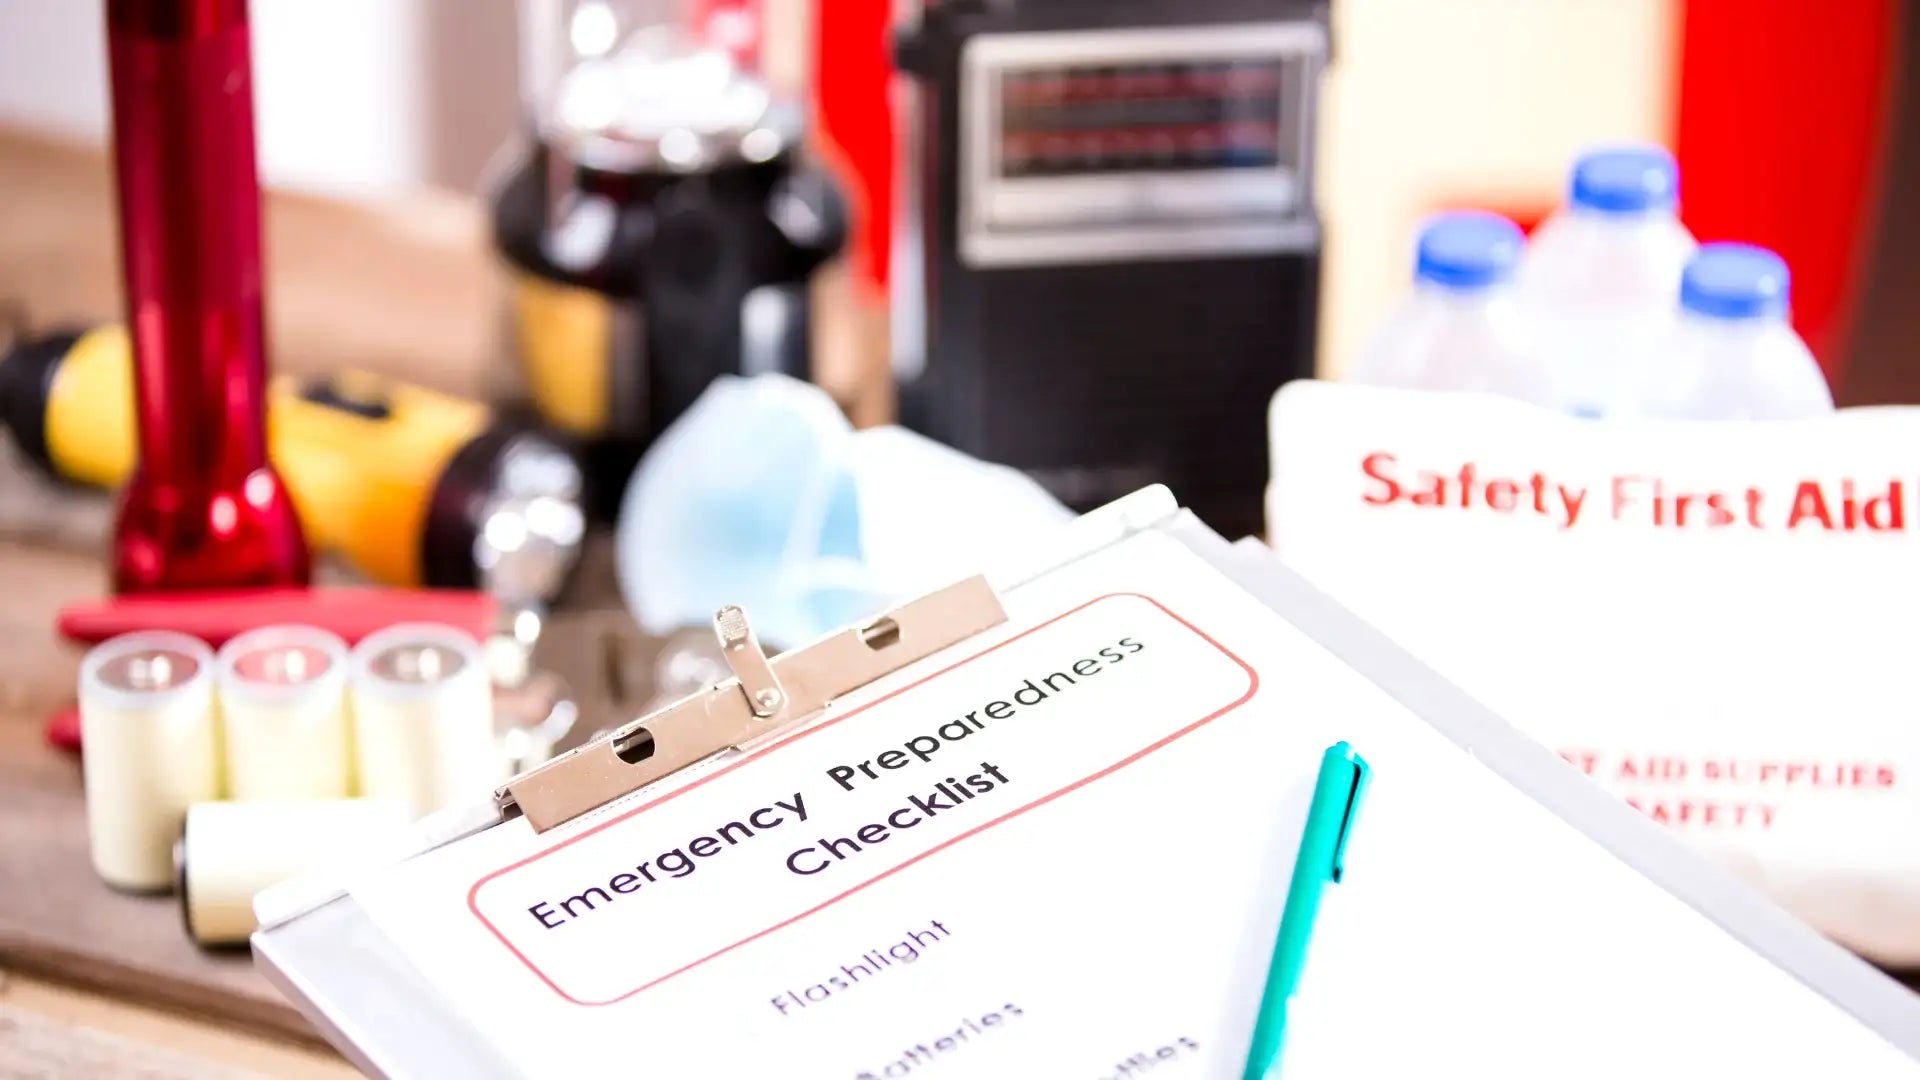 Get Our Disaster Preparedness Checklist: The Survival Checklist That Can Save Your Life